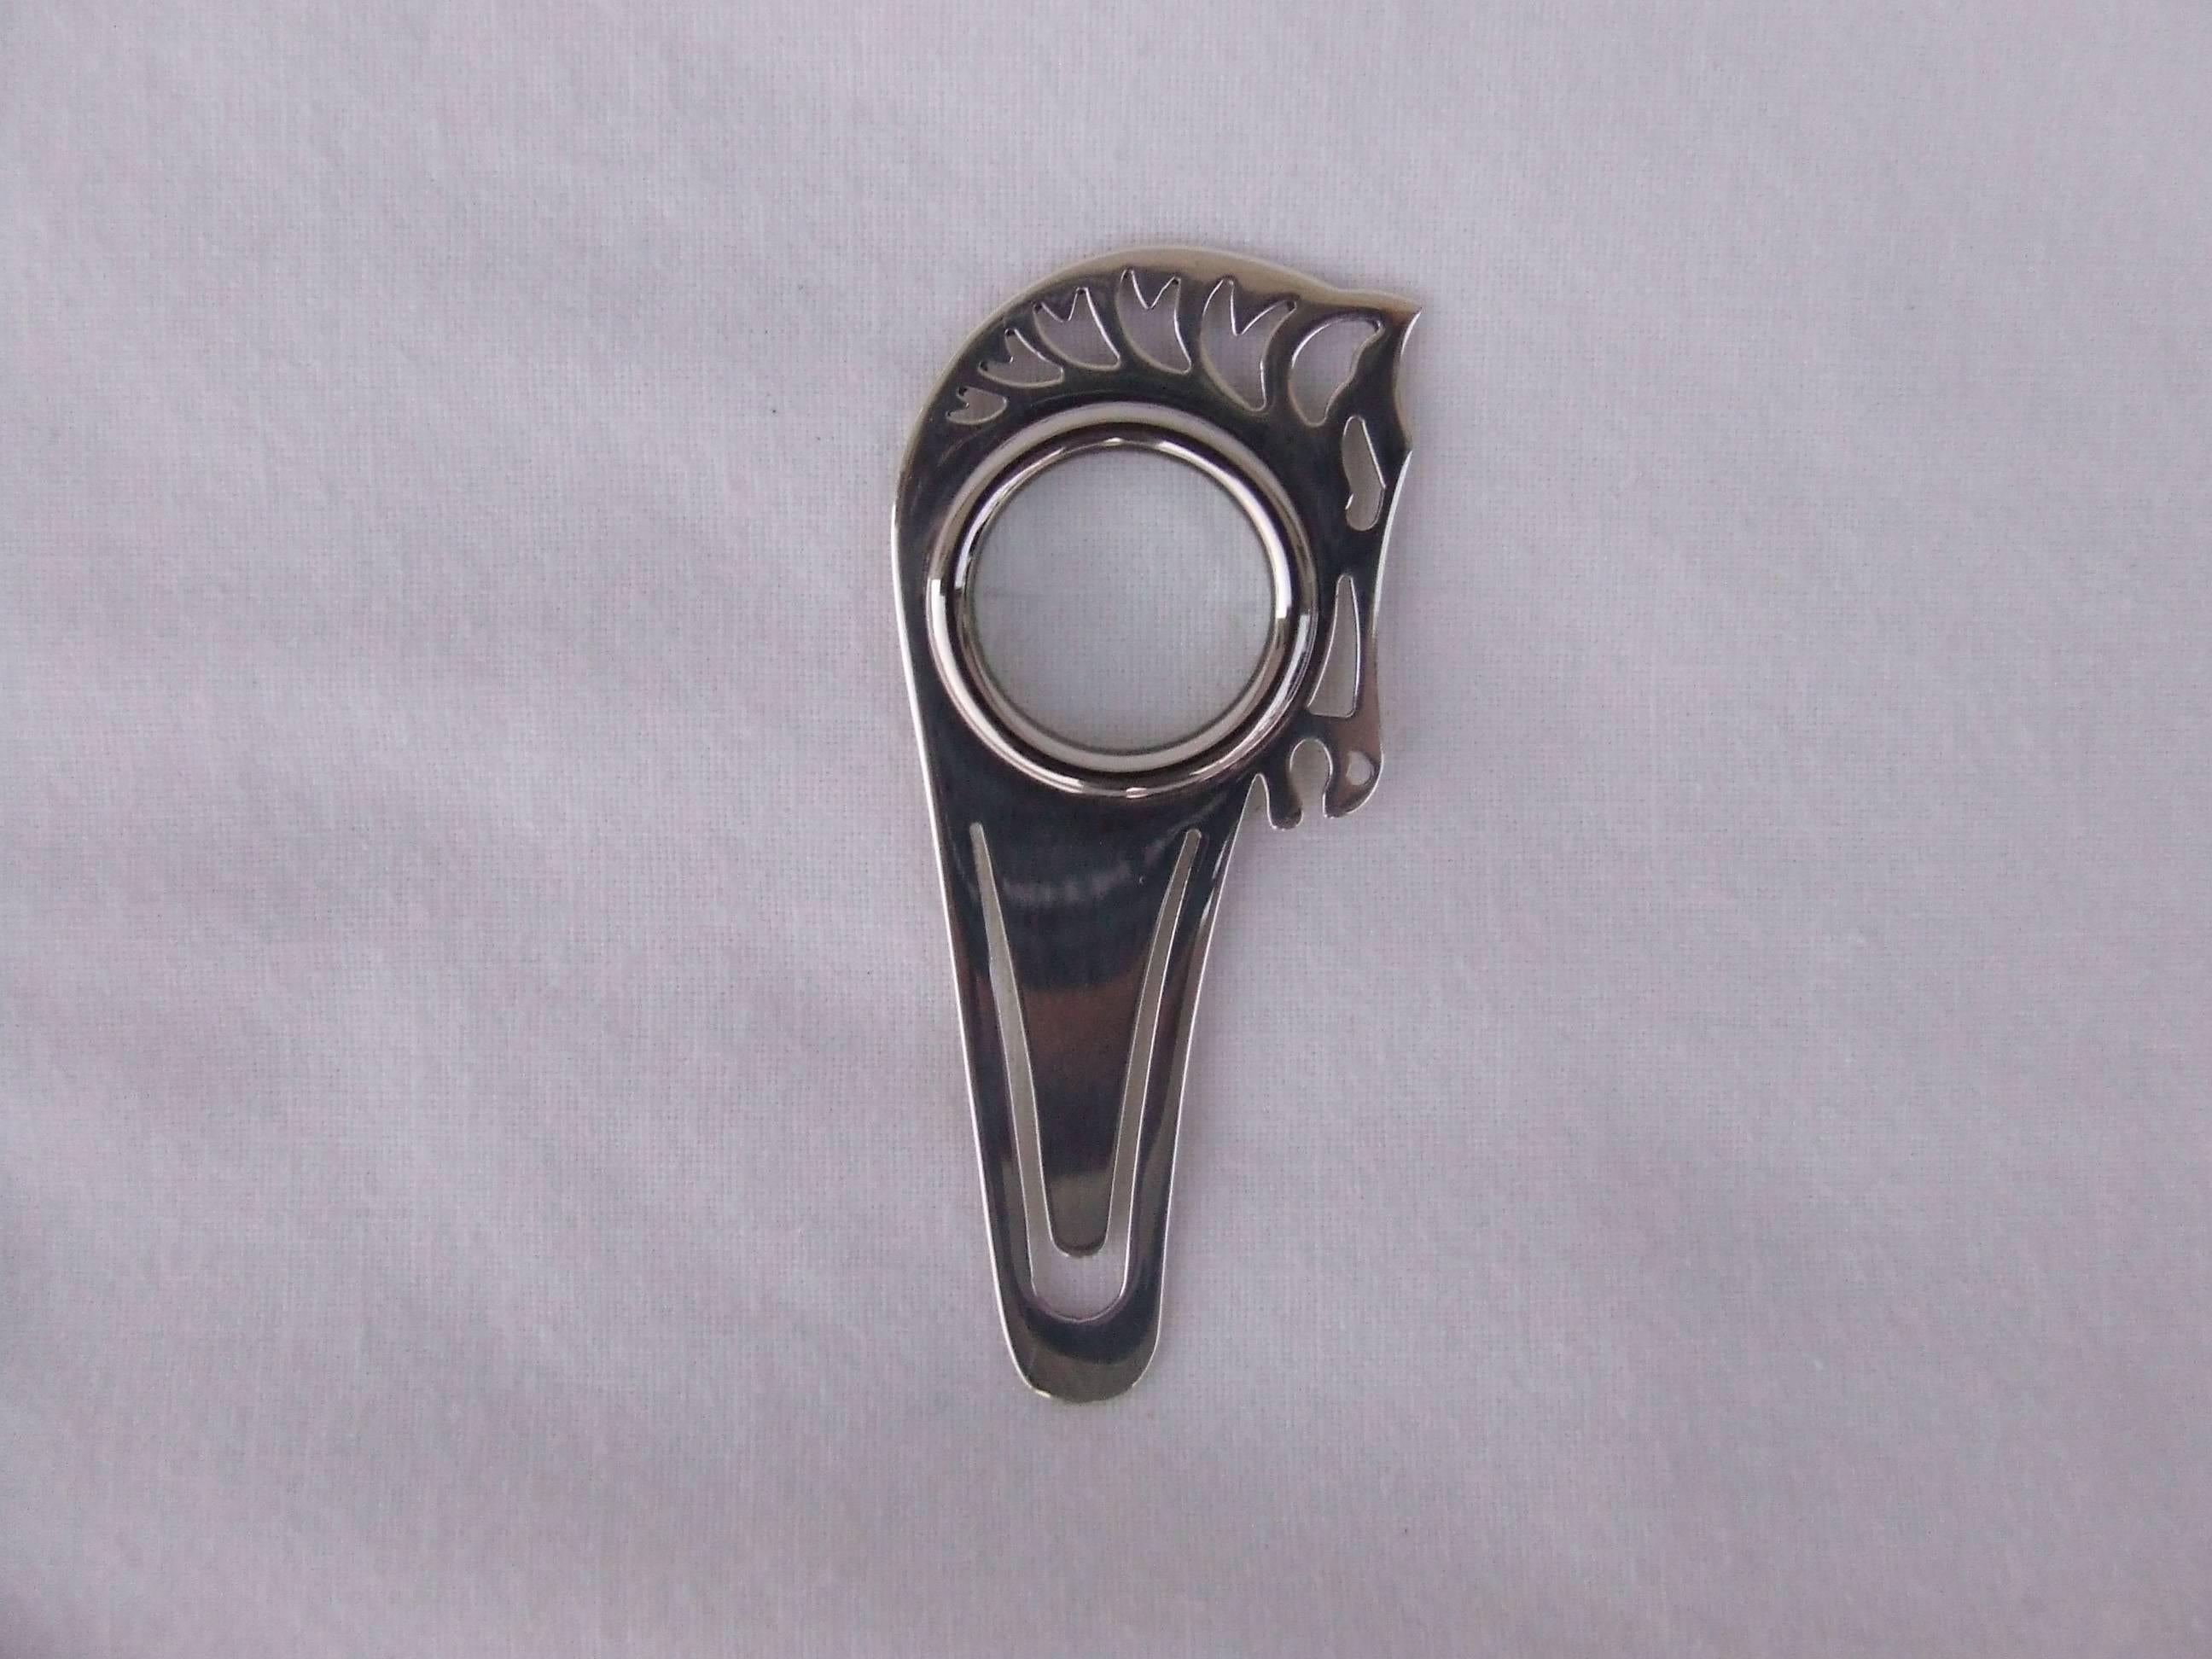 Authentic Hermes 3 functions item:

- paperclip
- magnifying glass
- bookmark

Shaped as horse head

Made of Silvered metal

